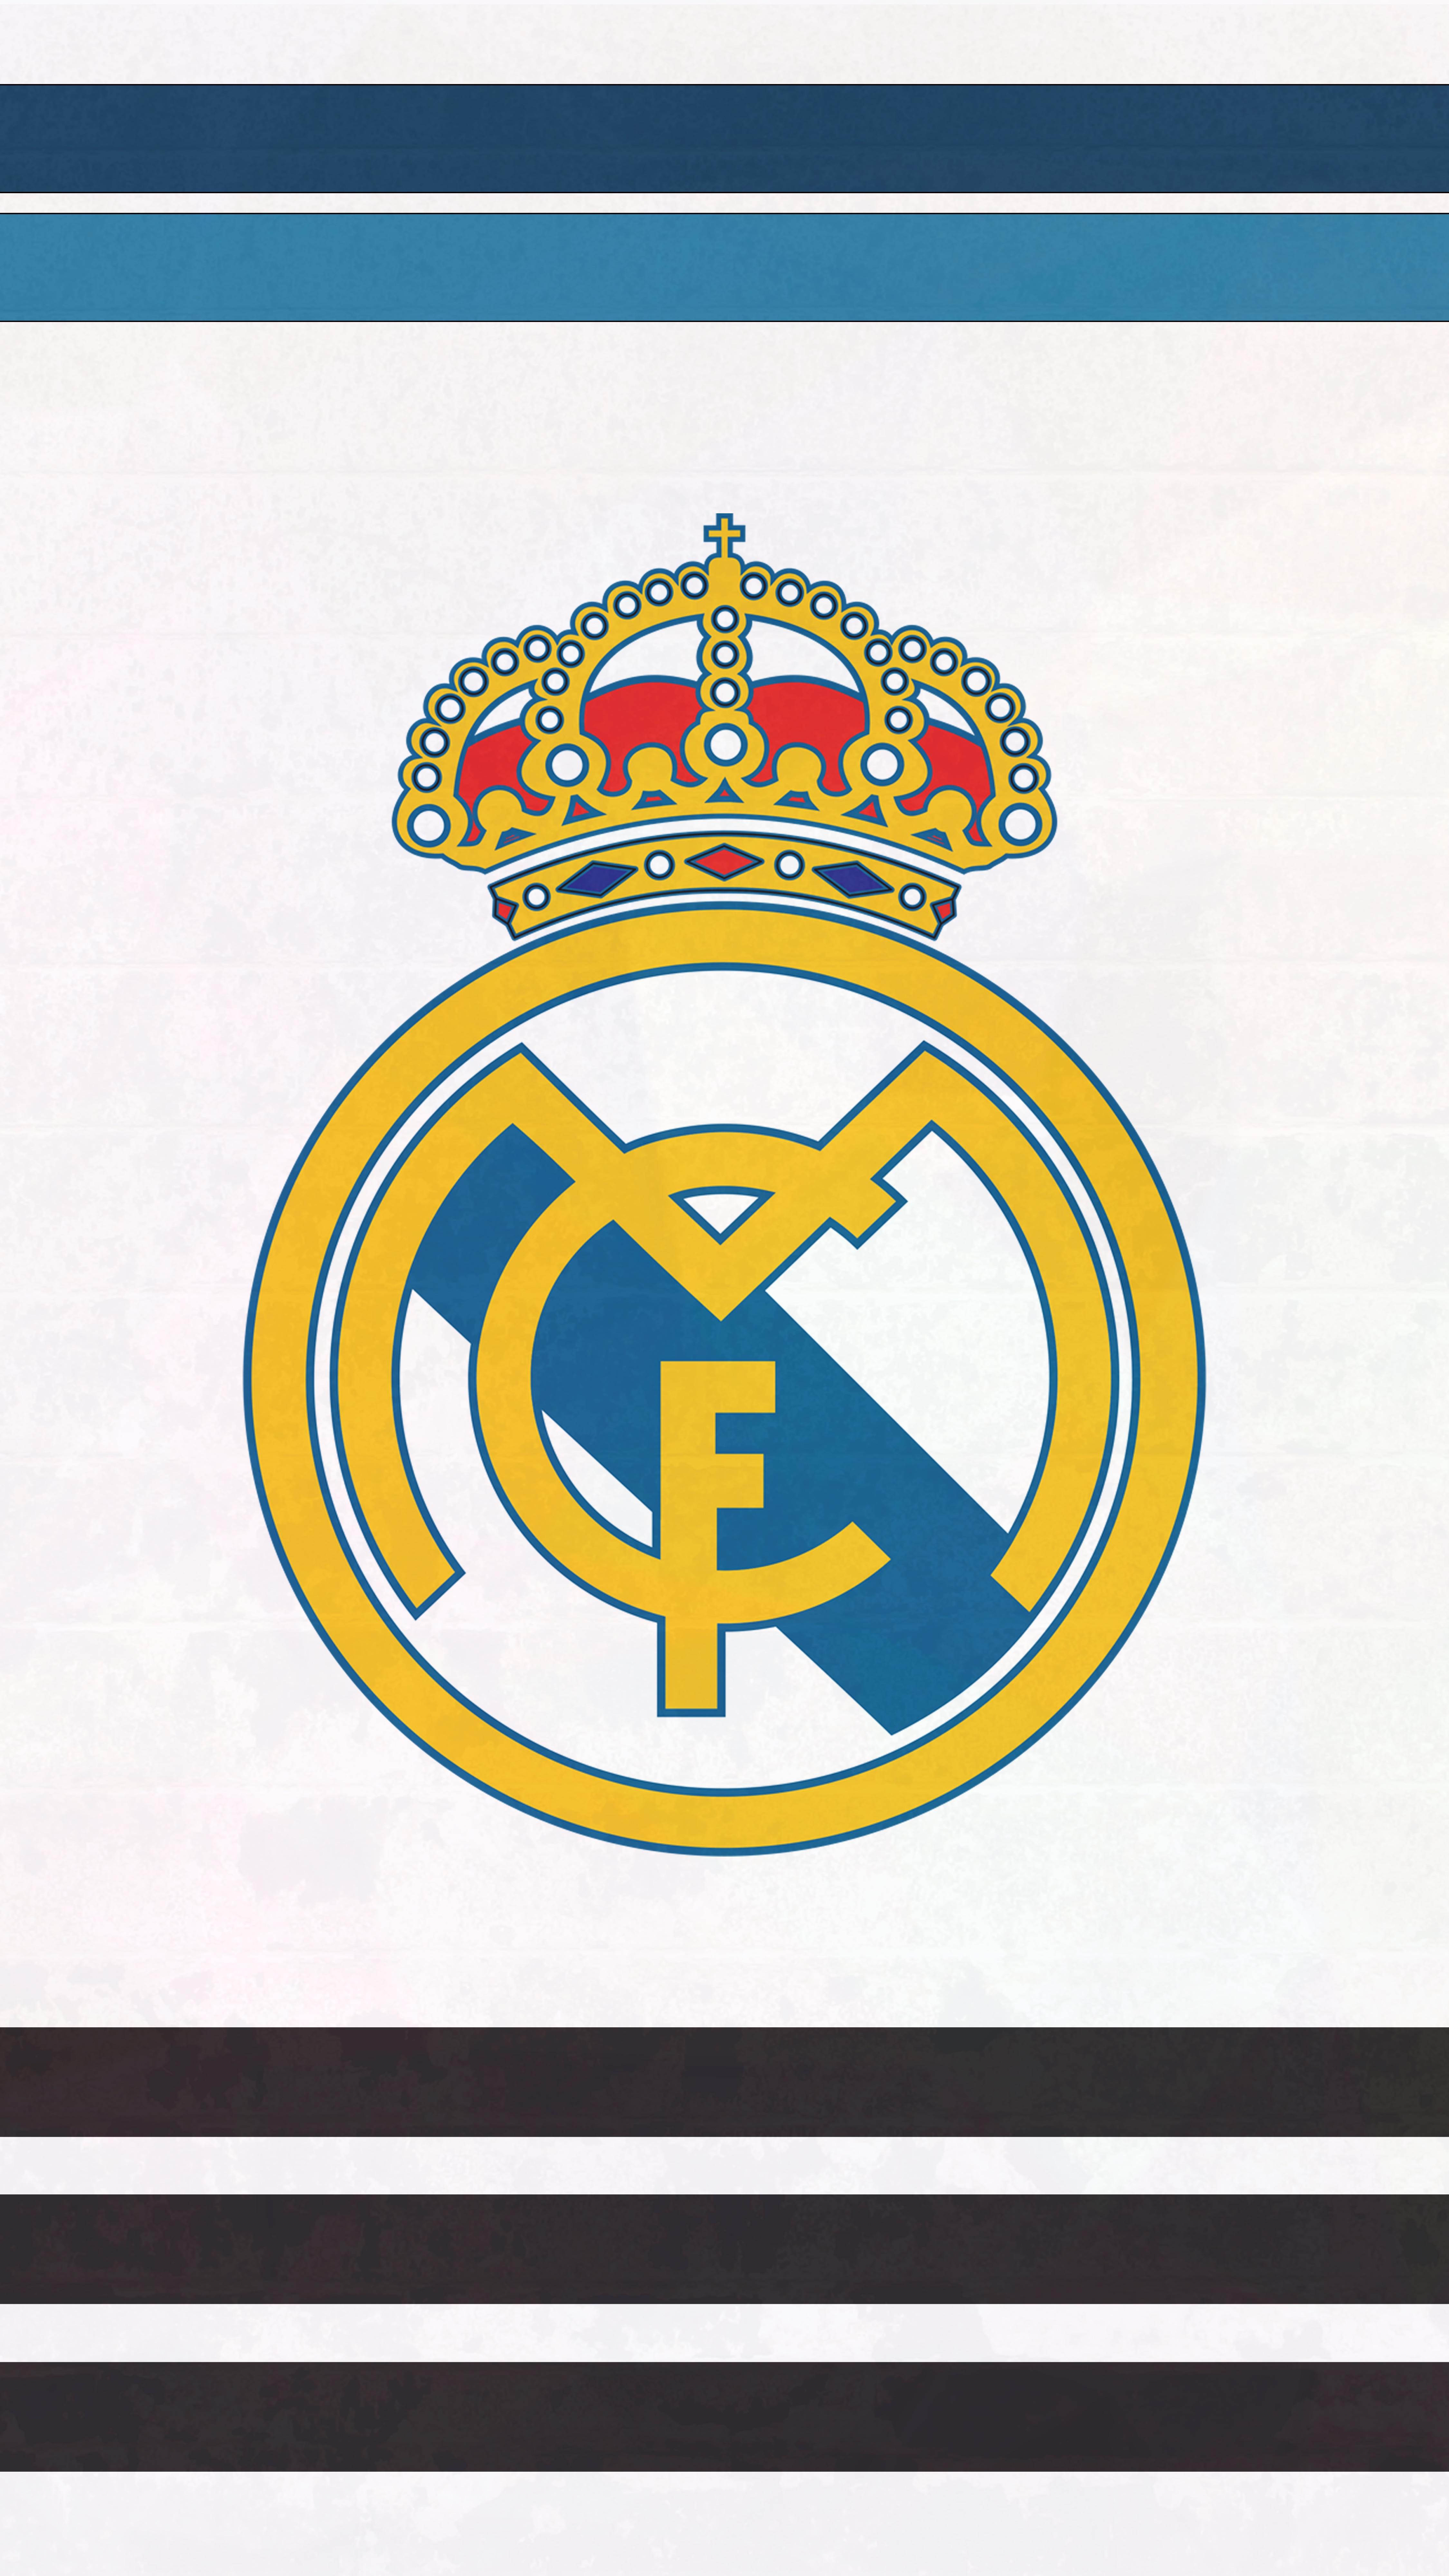 This Real Madrid wallpaper is based on another design I saw in